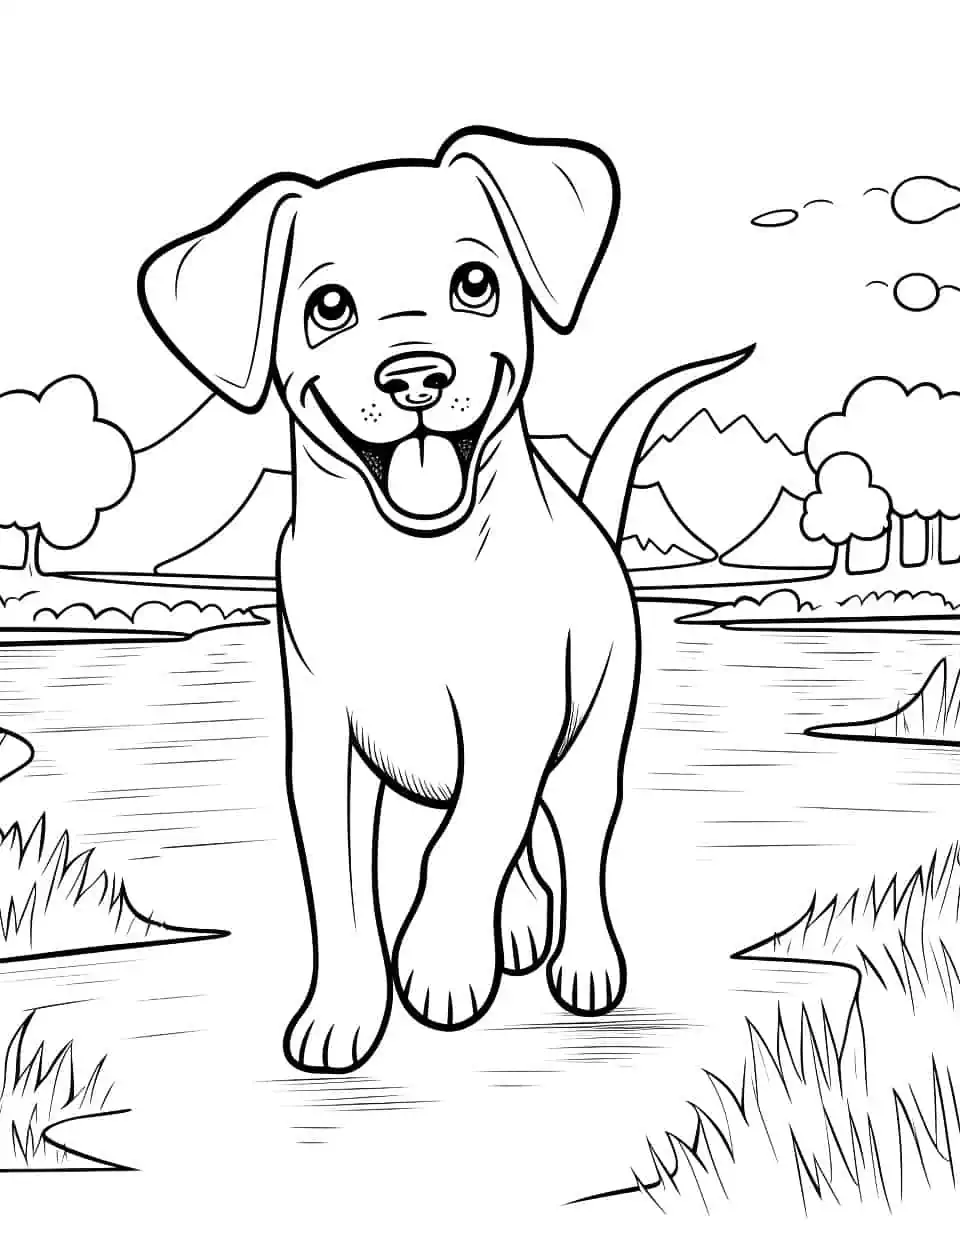 Labrador at the Park Dog Coloring Page - A happy Labrador running in a park with trees and a pond in the background.